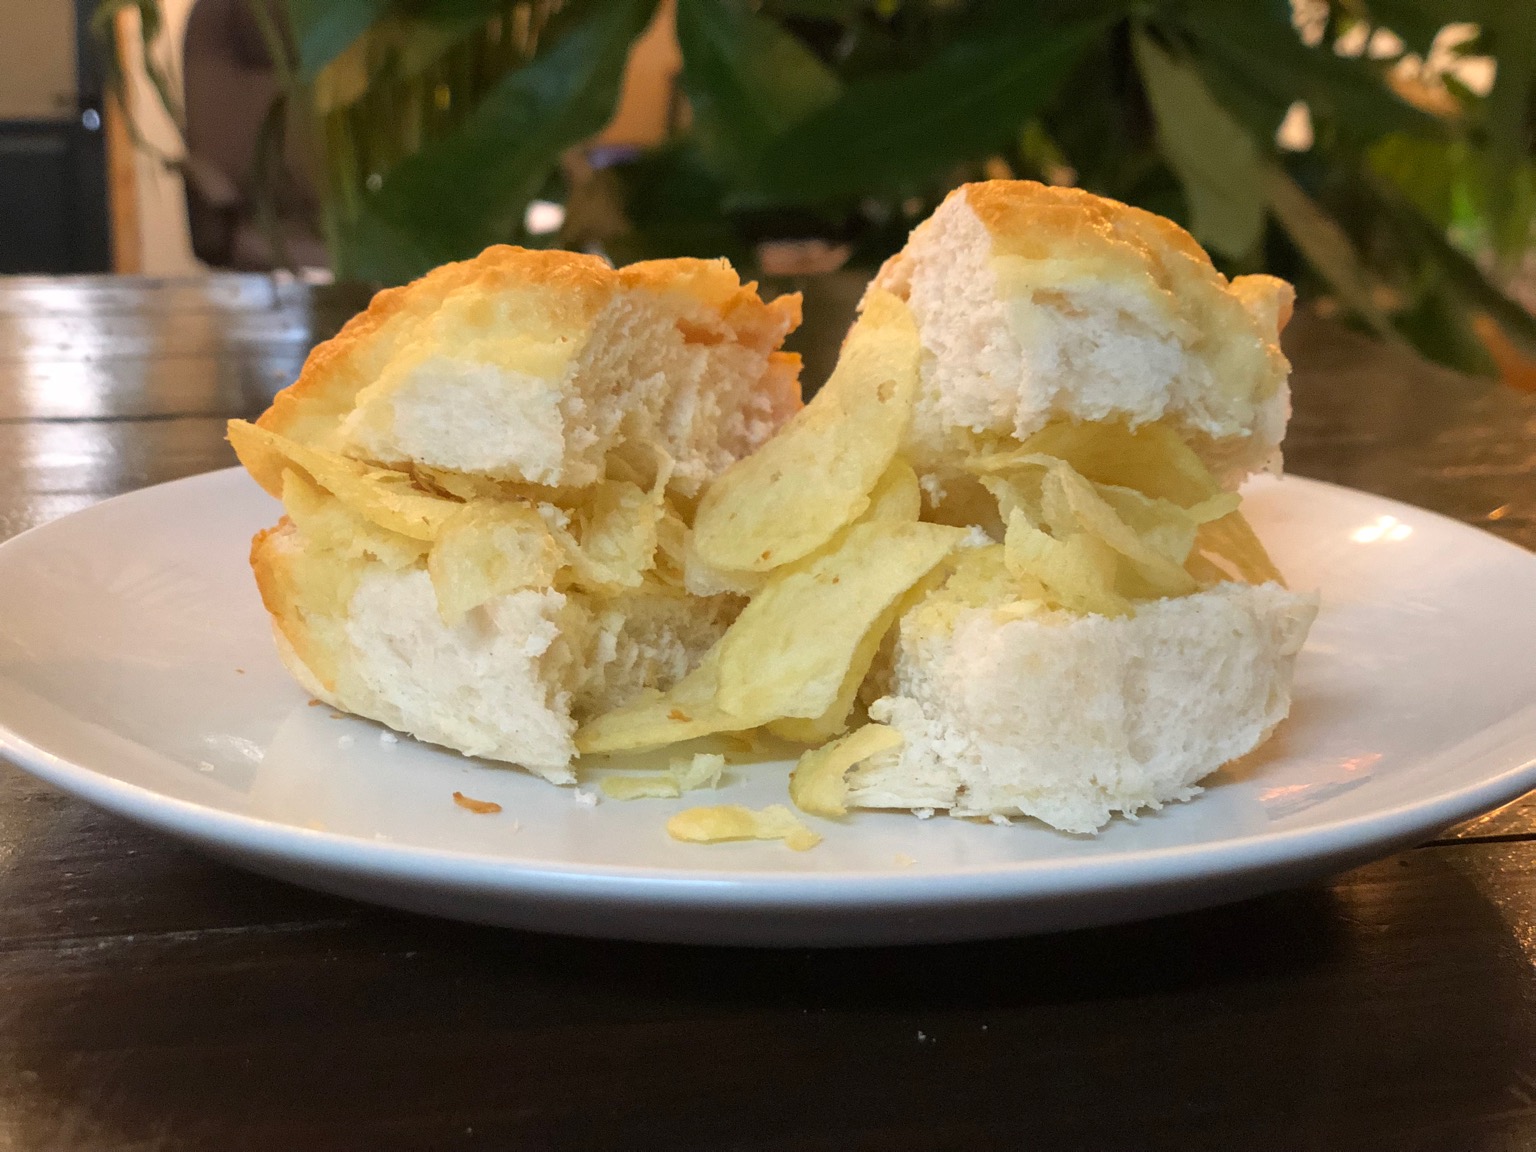 Crisps in and around a halved cheese-topped roll